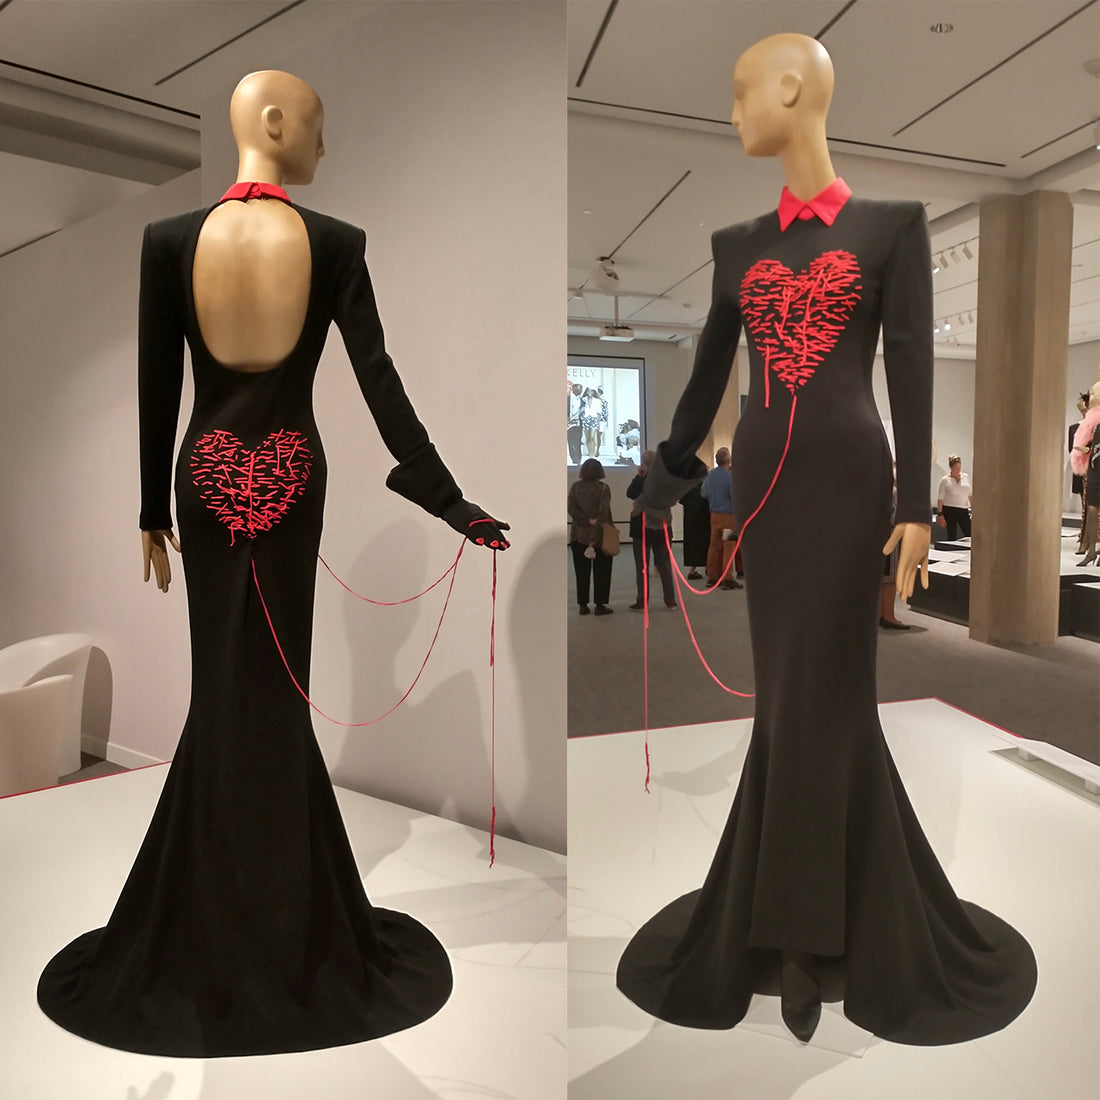 Patrick Kelly: Runway of Love at the Peabody Essex Museum